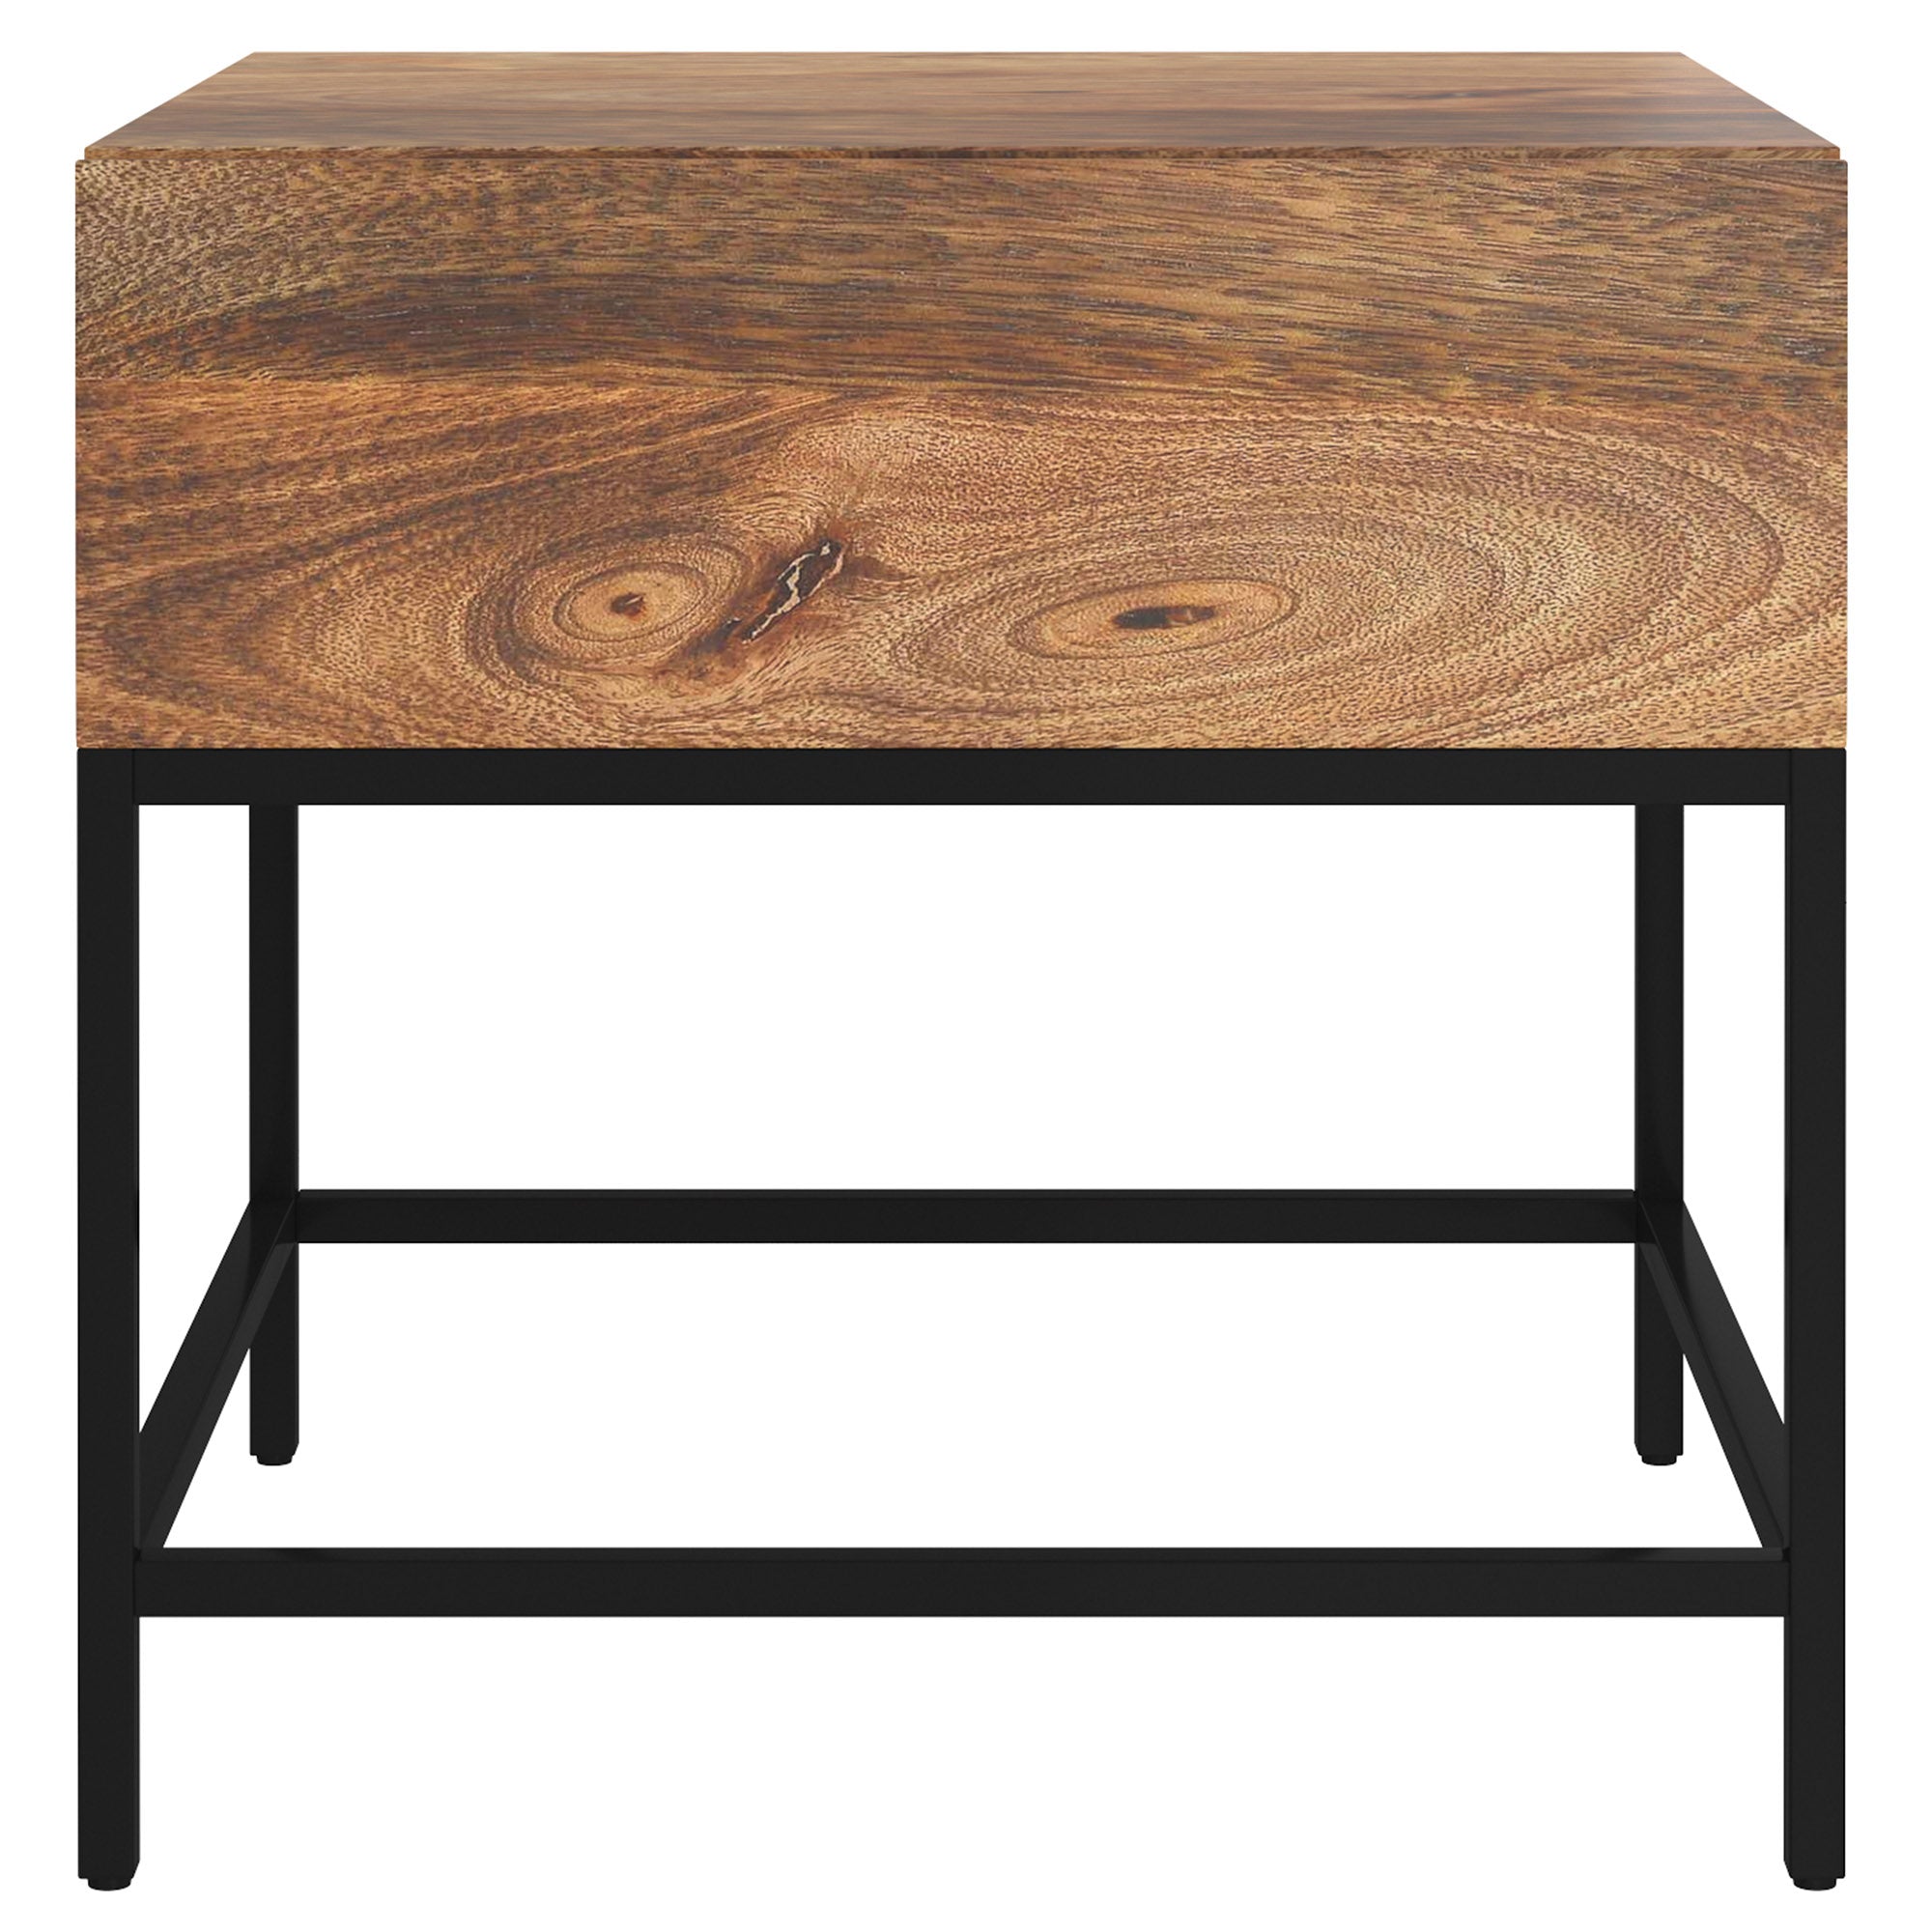 OJAS-ACCENT TABLE-NATURAL BURNT